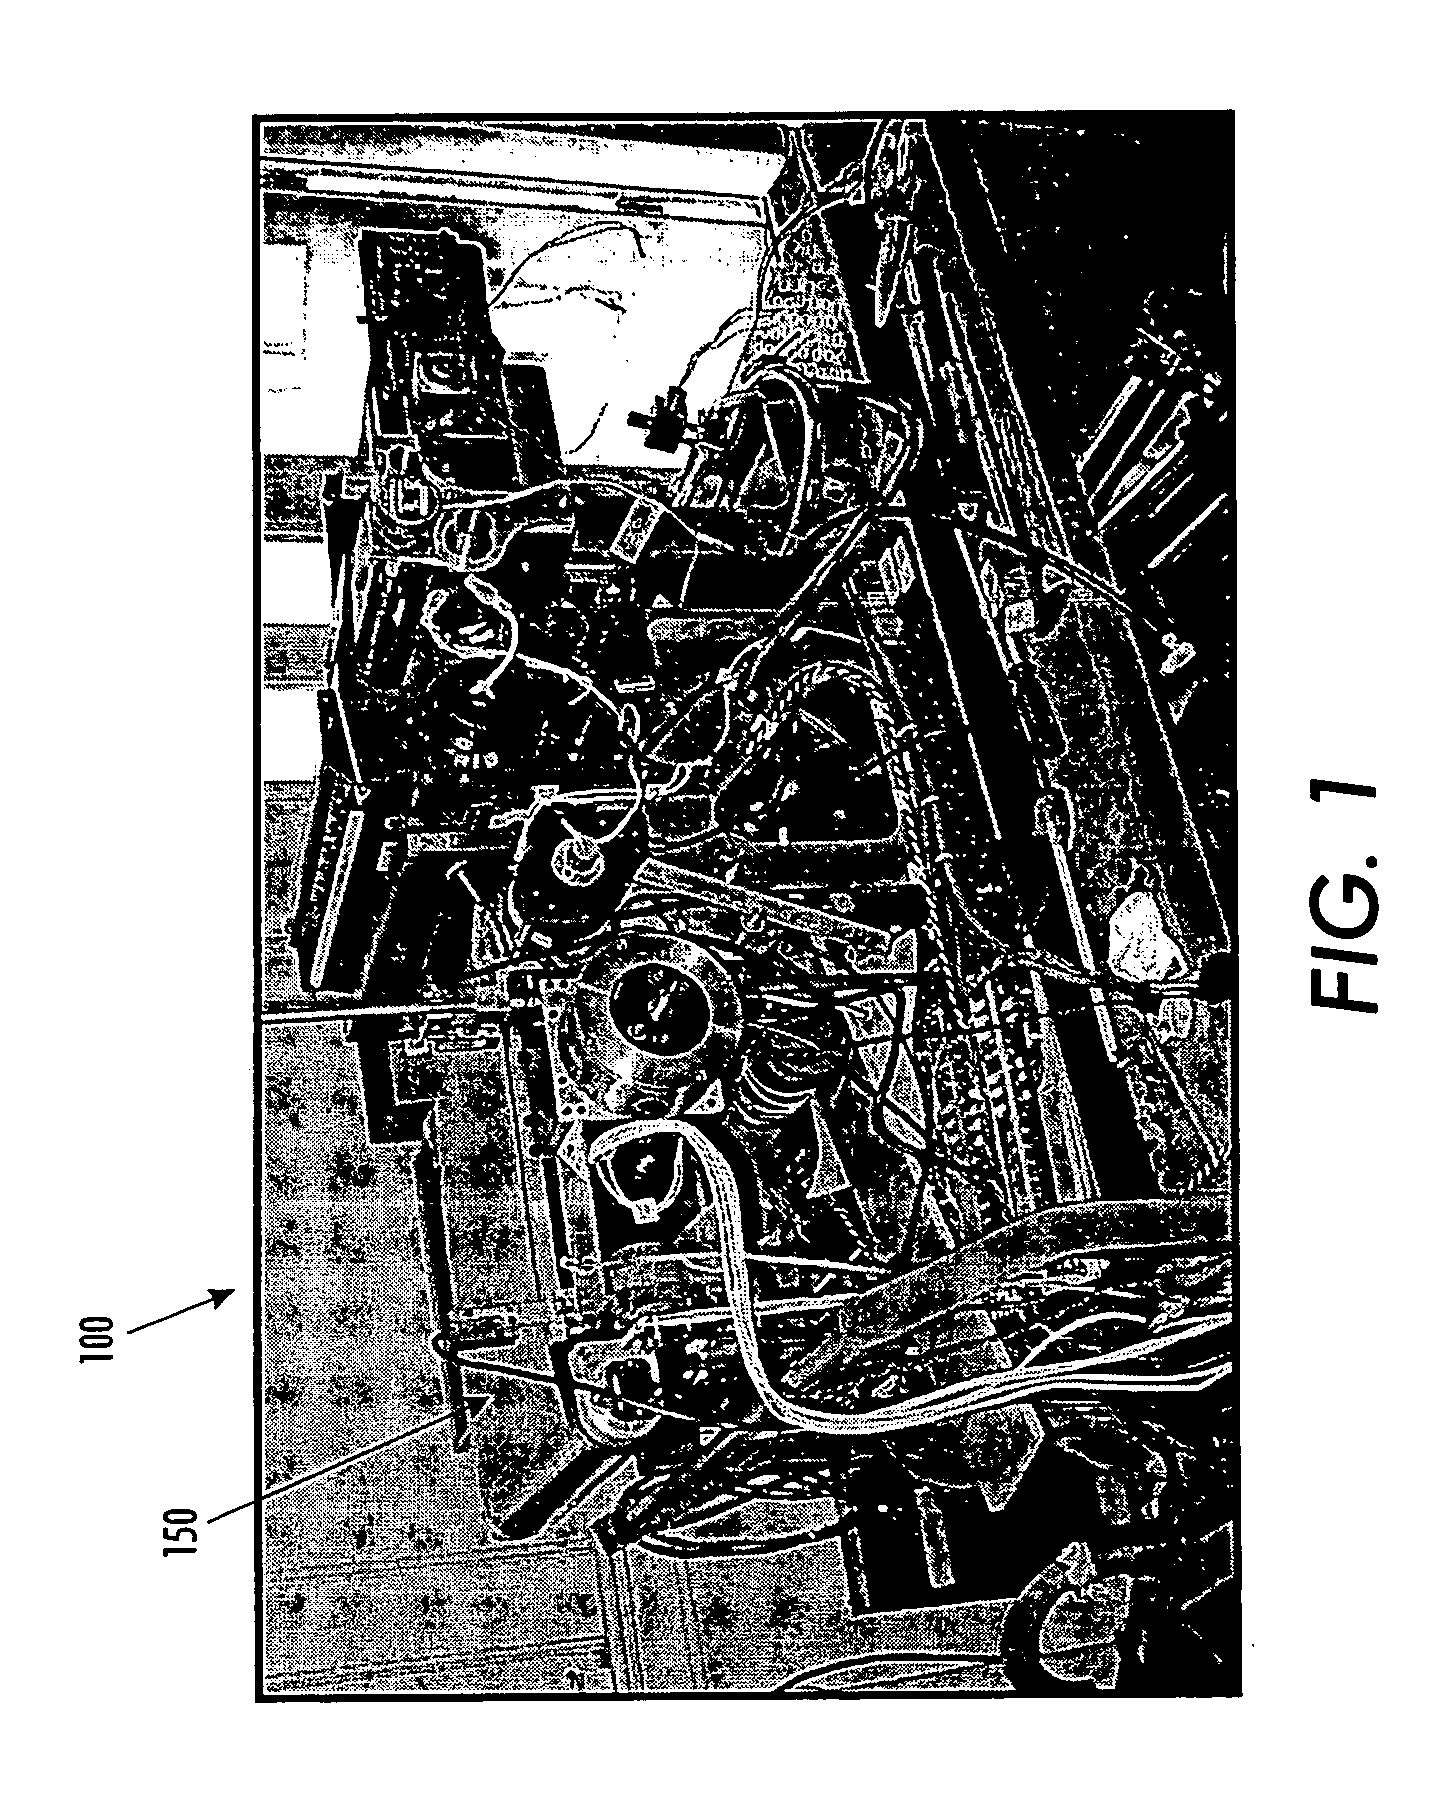 Conductive bi-layer intermediate transfer belt for zero image blooming in field assisted ink jet printing